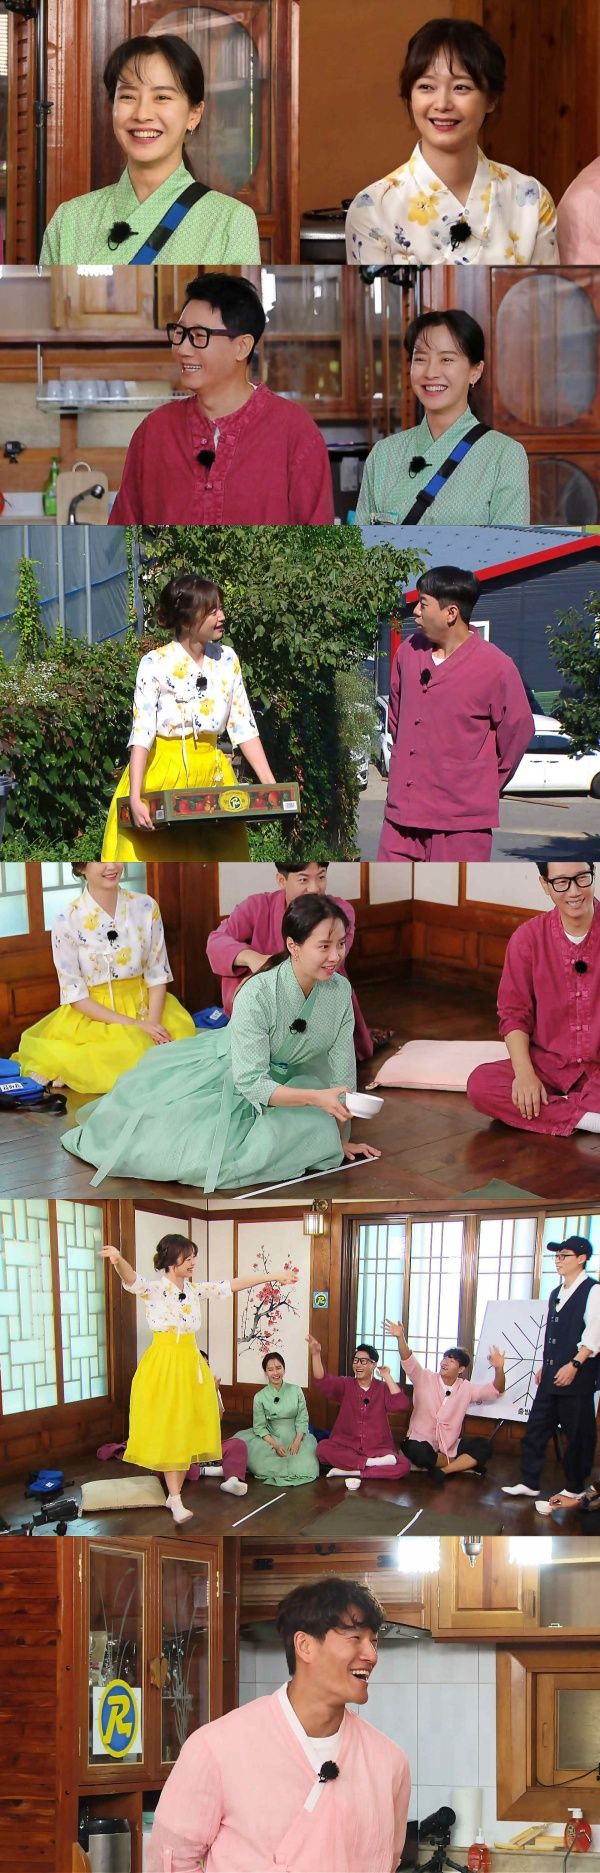 Running Man Kim Jong-kook laughed at the Korean traditional clothing wearing Gowoon pink.On SBS Running Man to be broadcasted on the 4th, various Korean traditional clothing fashion of Chuseok members will be released.In the previous Running Man recording, the members appeared as Korean traditional clothing fashion with a special feature of Chuseok.While Korean traditional clothing is tailored to each style and taste, Kim Jong-kook, who appeared in Gowoon pink Korean traditional clothing, was attracted to him. Lee Kwang-soo, who saw it, said, Did not you believe that Korean traditional clothing was pink?and re-ignited the controversy over Prince Pinks Kim Jong-kook.Kim Jong-kook was told that the best color of the year is pink while watching the New Years Day on the Money Bag Rat side, which was aired on New Years Day special feature earlier this year.At the time, Kim Jong-kook said, I do not care about the owner, but this year, I often wore toxic pink clothes and controversy among the members.In the end, Kim Jong-kook said, I believe in a lot of people. It is better not to do bad things.The Korean traditional clothing of Mingling Sister Song Ji-hyo and Jeon So-min also caught the eye.Song Ji-hyo digests the Korean traditional clothing of the green series together, while Jeon So-min appeared in a bright yellow traditional clothing that matches the usual youthful image and attracted the response of the scene.In the following Chuseok special family situation drama, the activities of Mingling Sisters shone.Song Ji-hyo played a role as a couple with Ji Seok-jin, causing laughter with her alluring beauty that does not match her husbands balance, and she was also active in the mission to make Chuseok food.Jeon So-min showed off the situation of disassembling Yang Se-chan and newlyweds as well as the dizzy ad-lib that shocked the members and laughed at everyone.Chuseok Special Family Situation Drama and Korean traditional clothing fashion full of Running Man members will be released at Running Man which is broadcasted at 5 pm on the 4th.